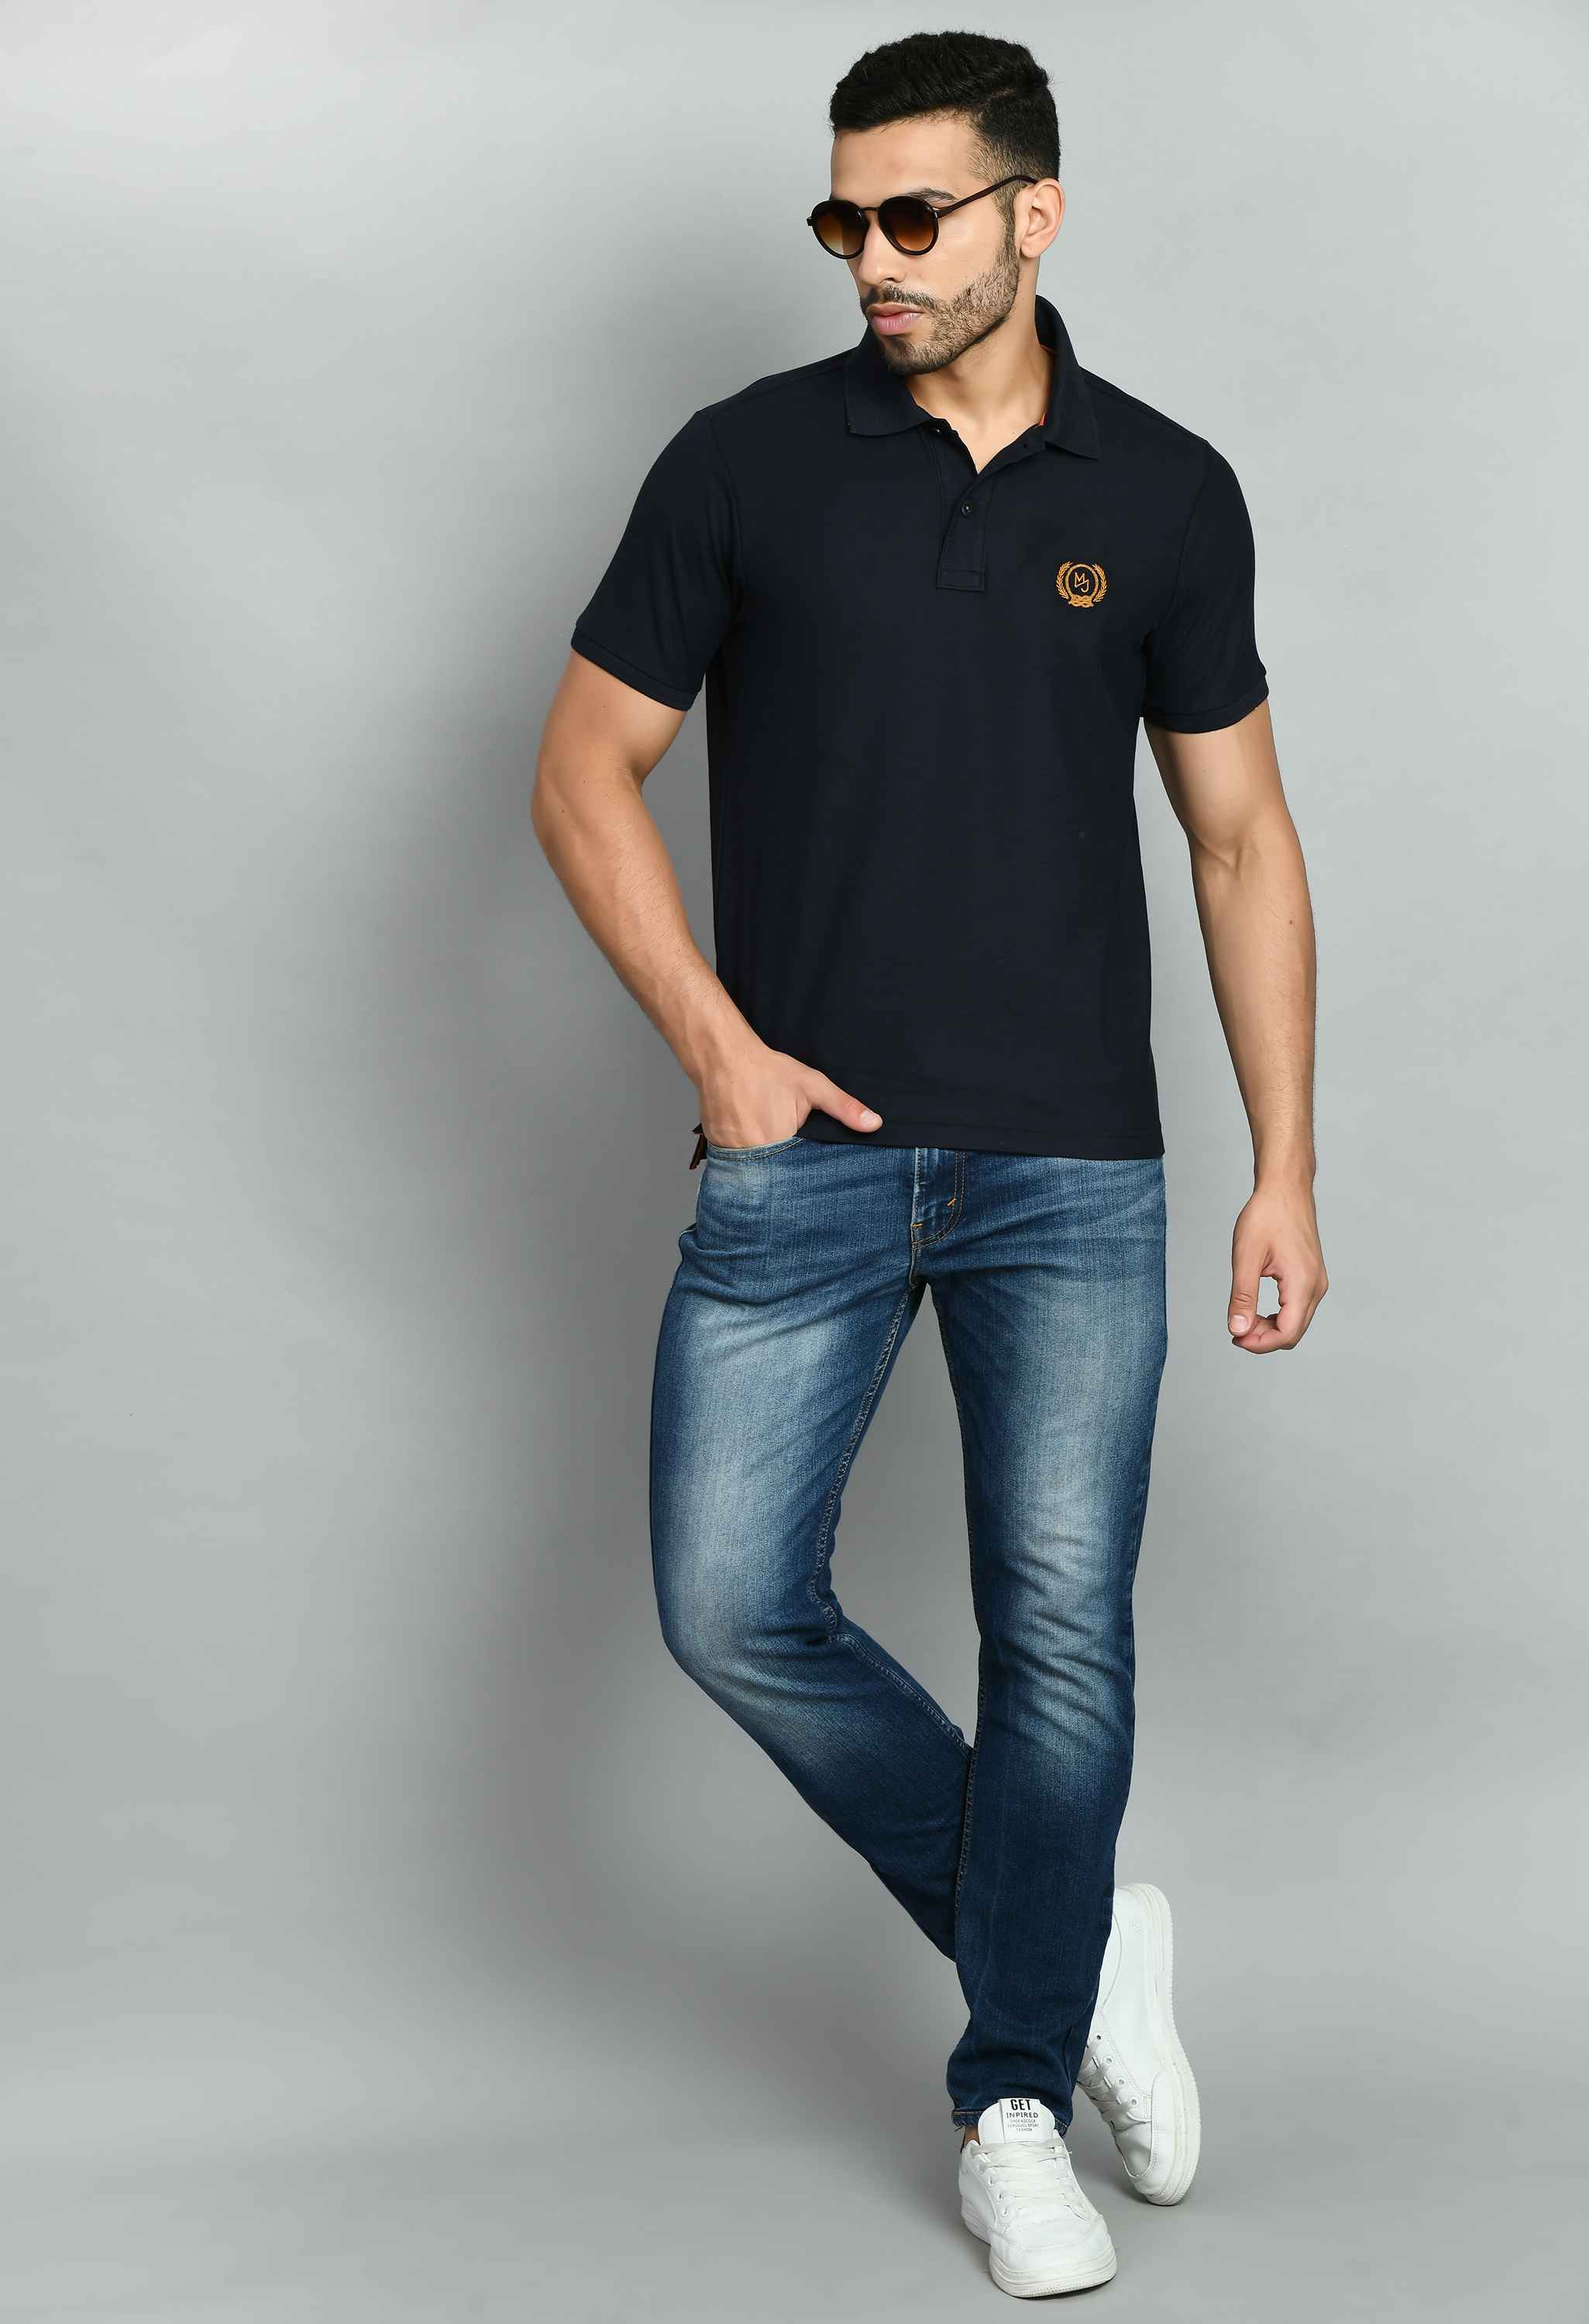 Men's Solid Black Smart Fit Polo T-Shirt - SQUIREHOOD